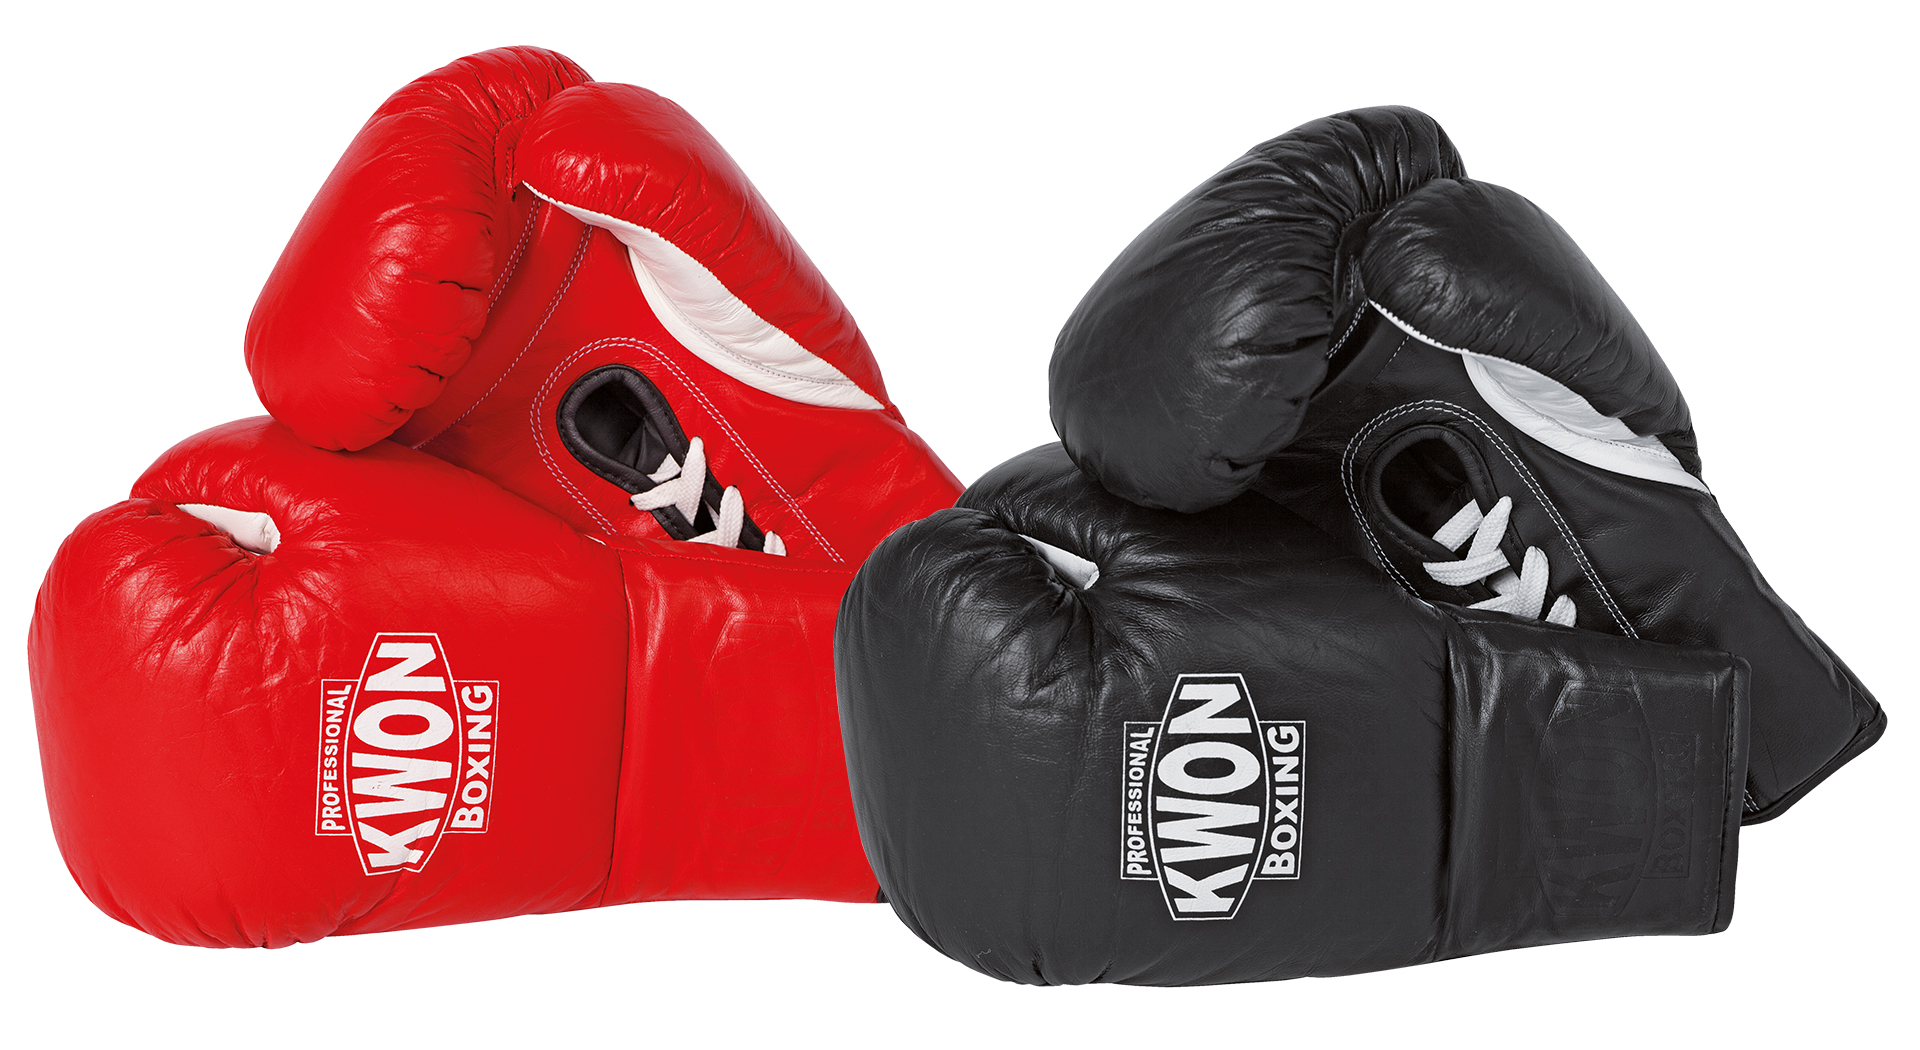 KWON PROFESSIONAL BOXING Gloves for with Leather laces competitions